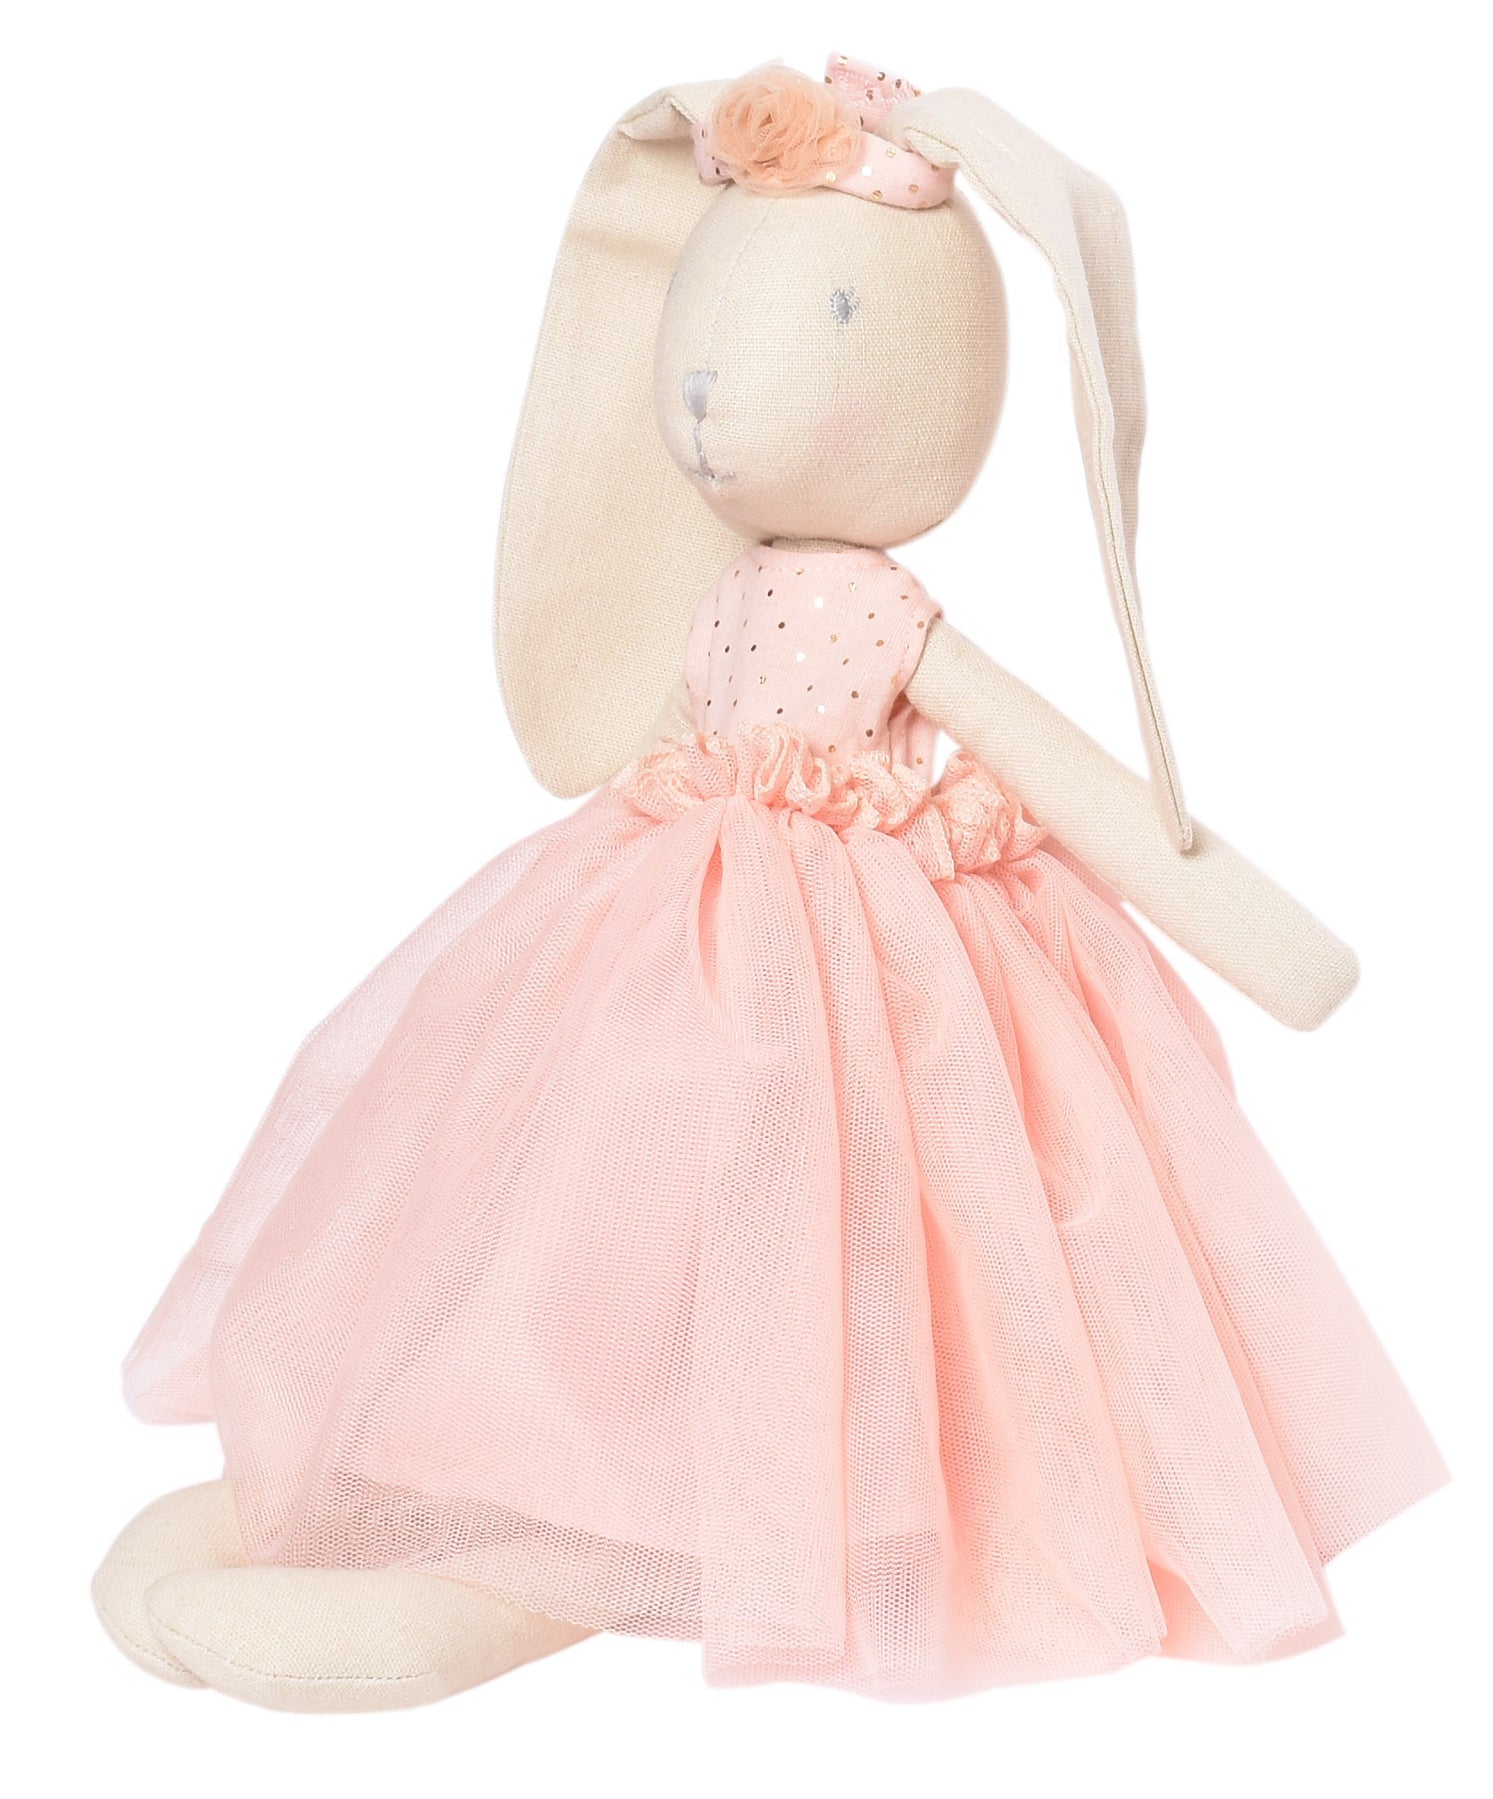 Marcella the Bunny Ballerina in Pink Toile Skirt - 0